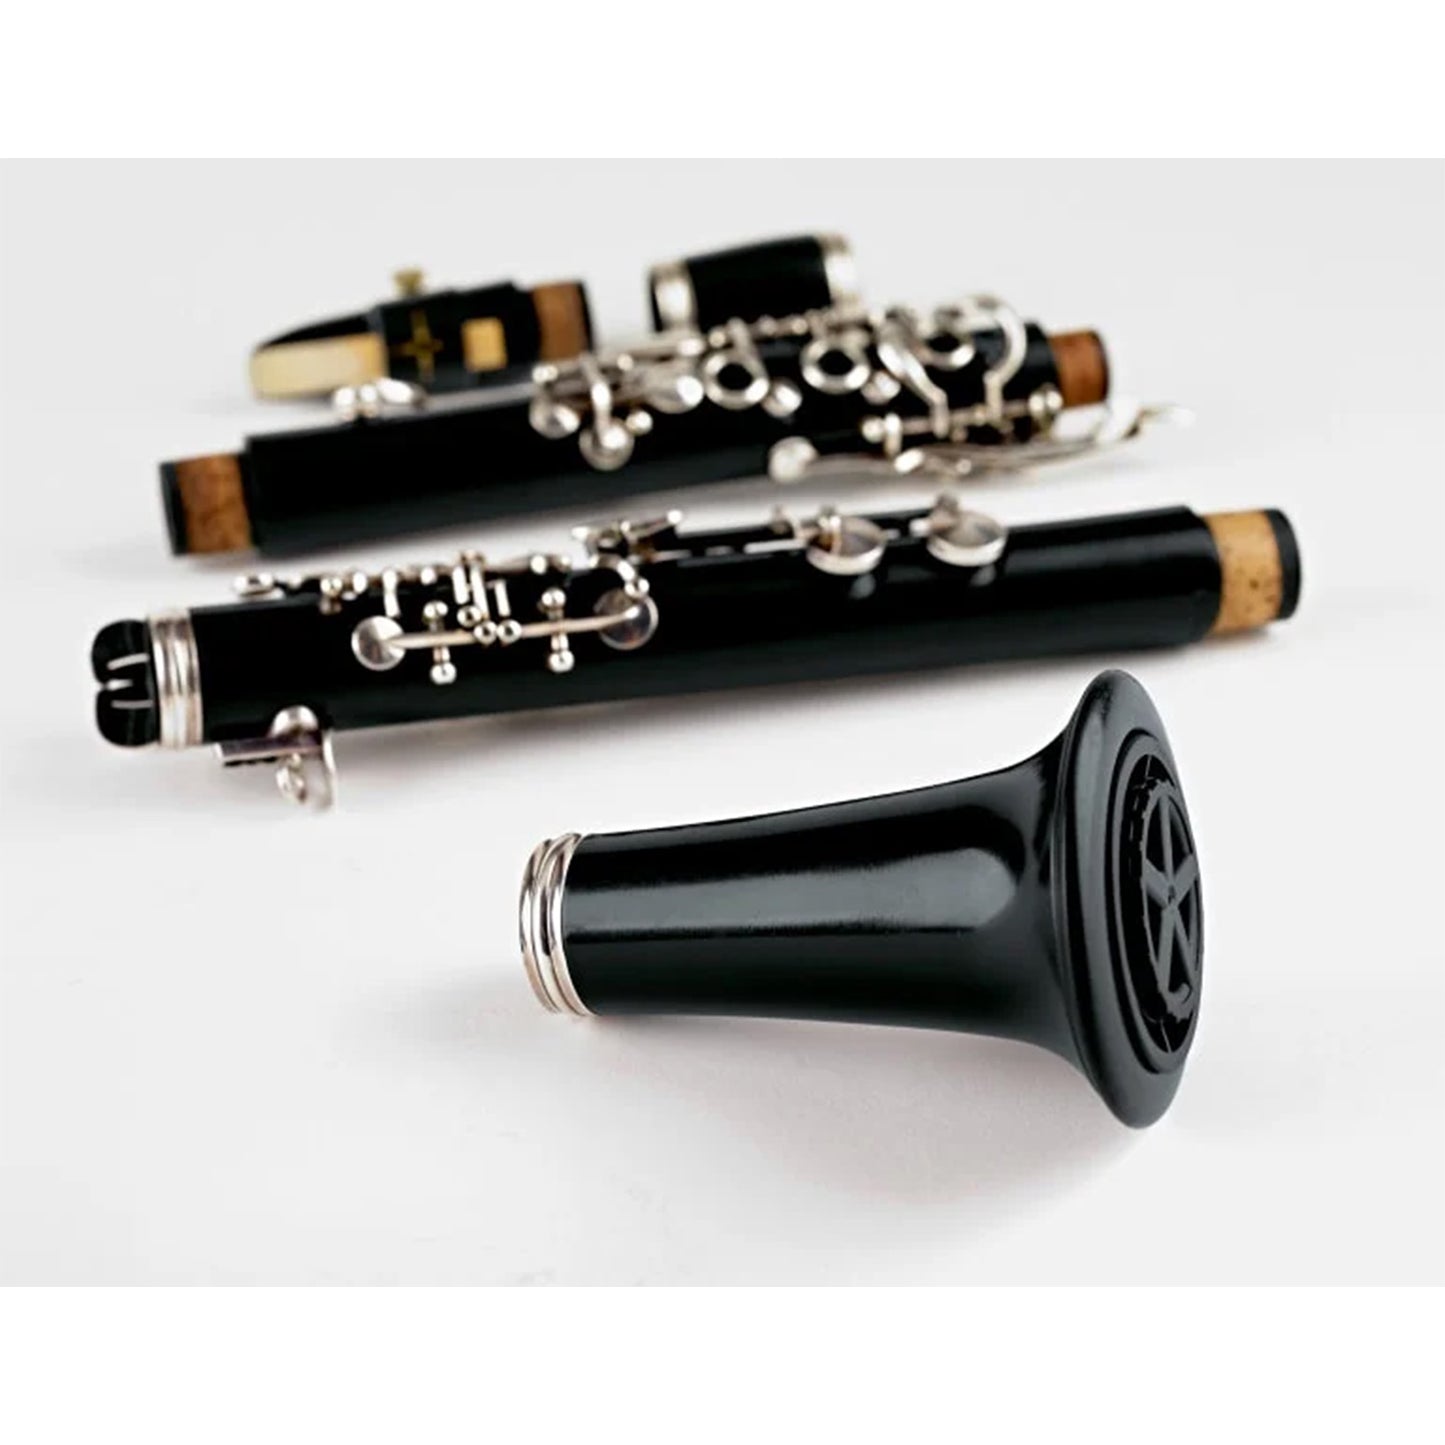 disassembled clarinet, with the disassembled stand inside the bell, showing how it's stored